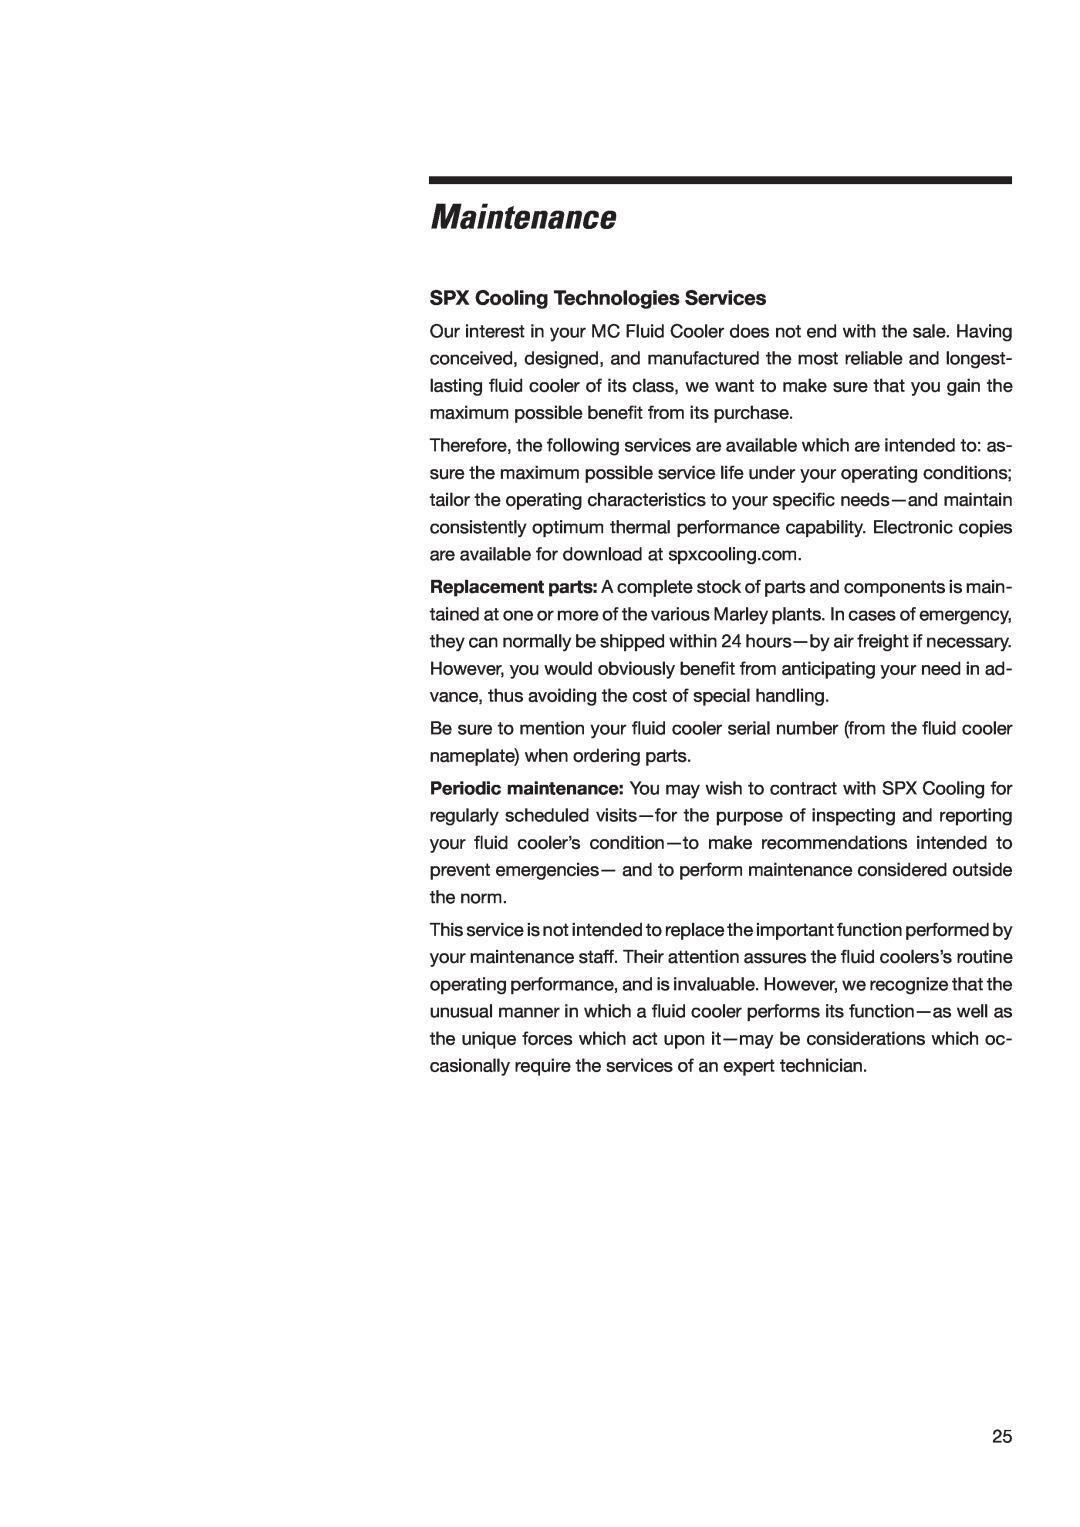 SPX Cooling Technologies none user manual SPX Cooling Technologies Services, Maintenance 